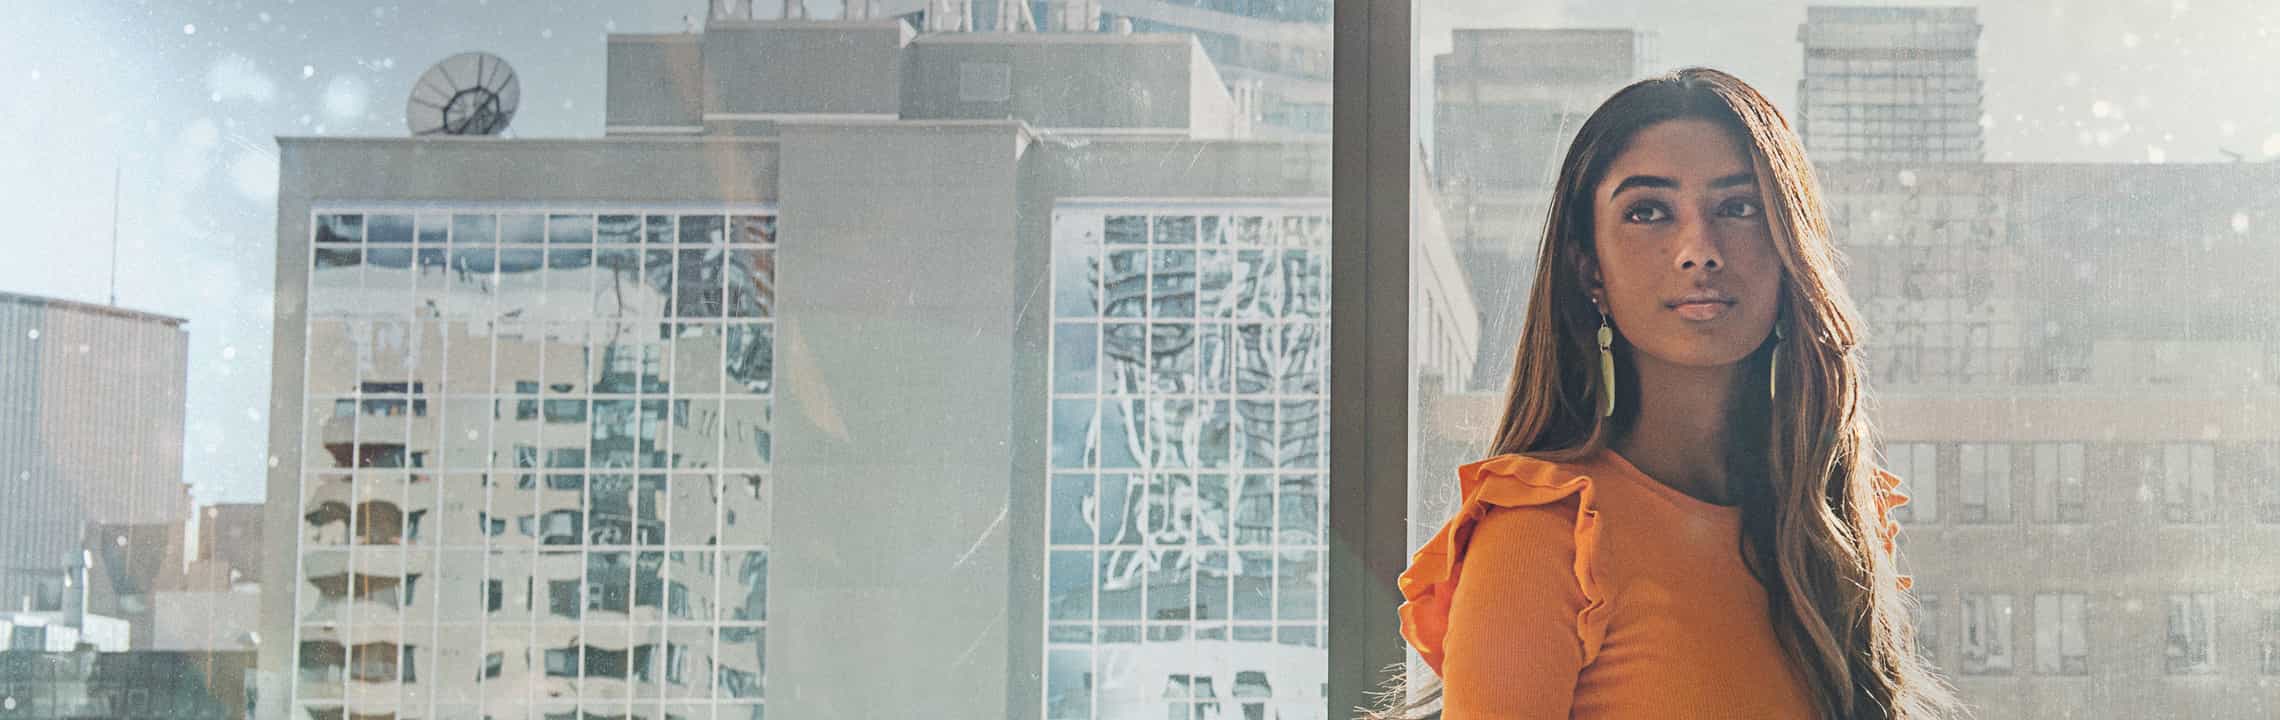 A close up of a female student, standing in front of a glass window with a view of Toronto buildings. She is looking away from the camera.